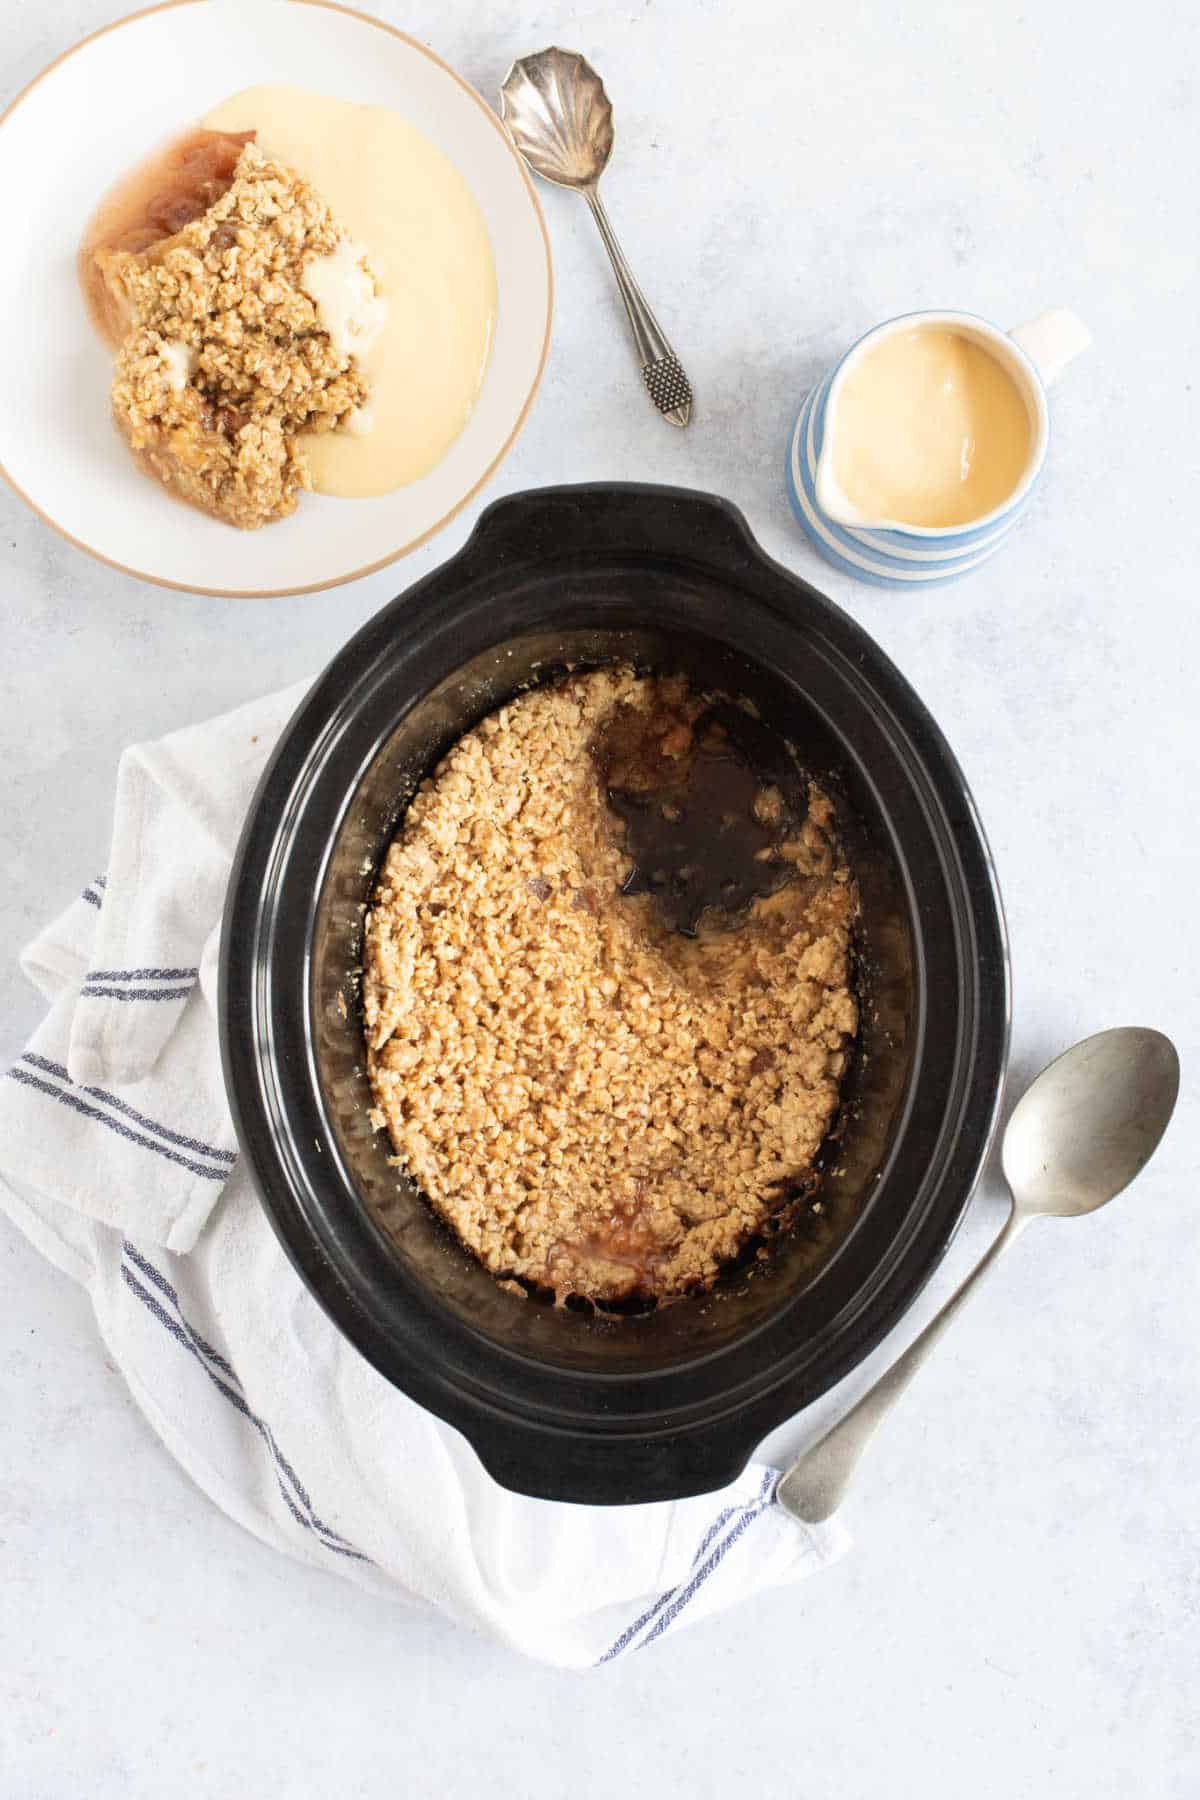 Slow cooker apple crumble in a black slow cooker basin with a bowl of apple crumble and custard on the side.